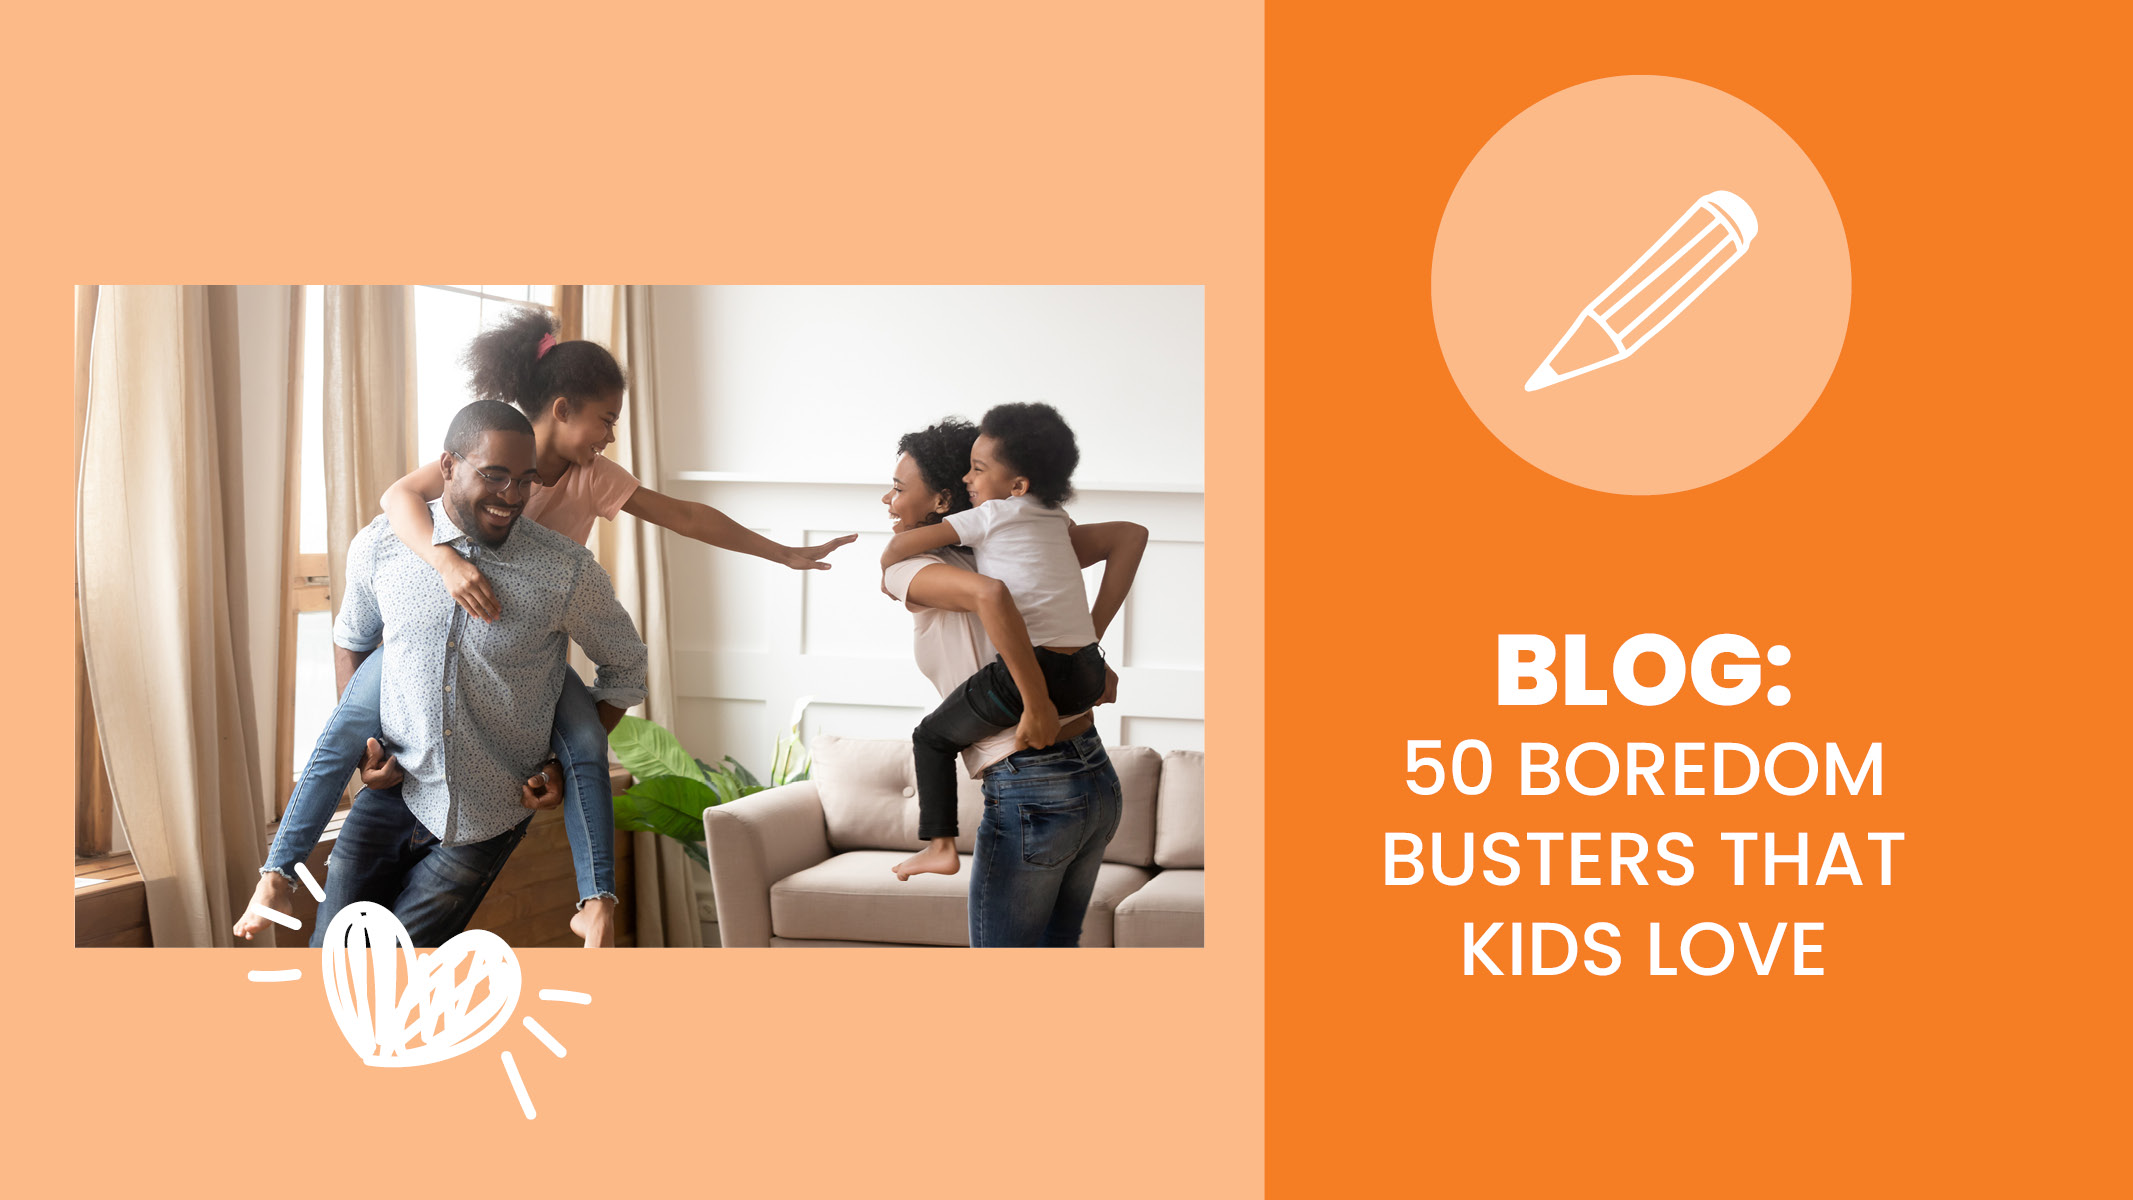 50 Boredom Busters that Kids Love